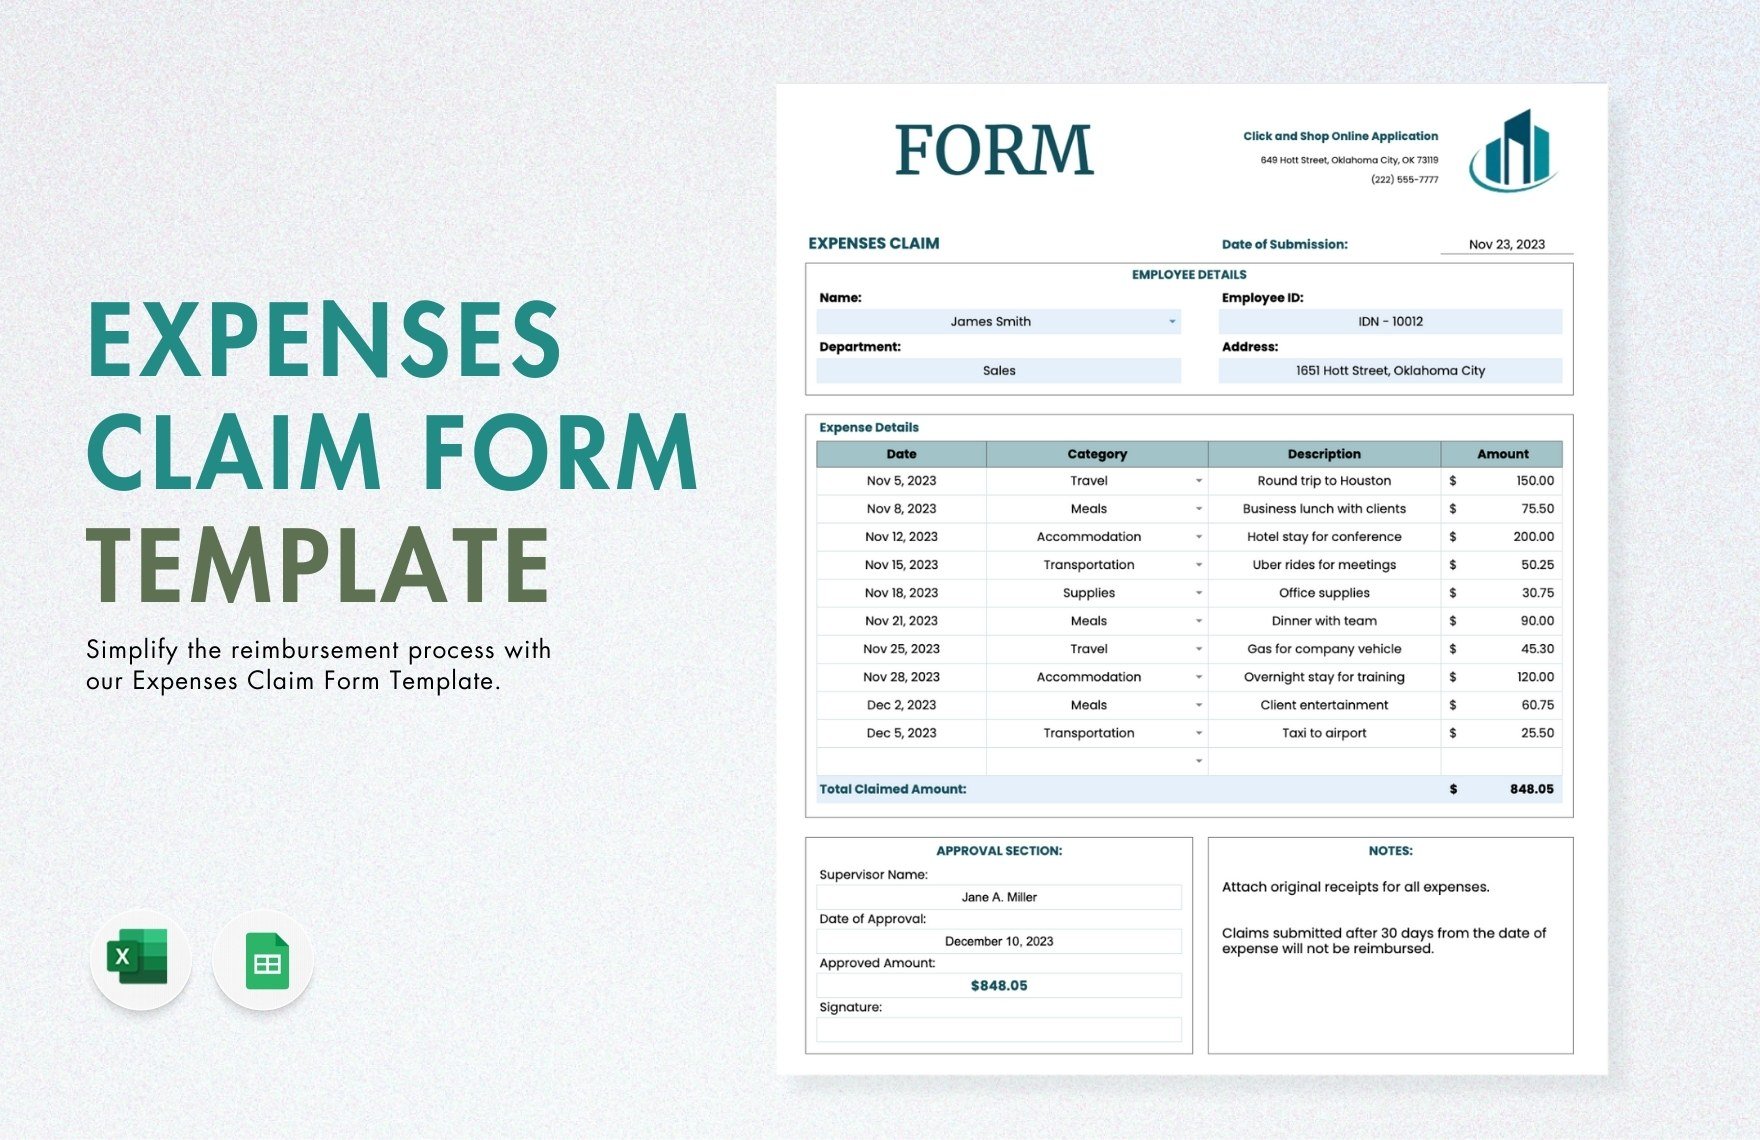 Expenses Claim Form Template